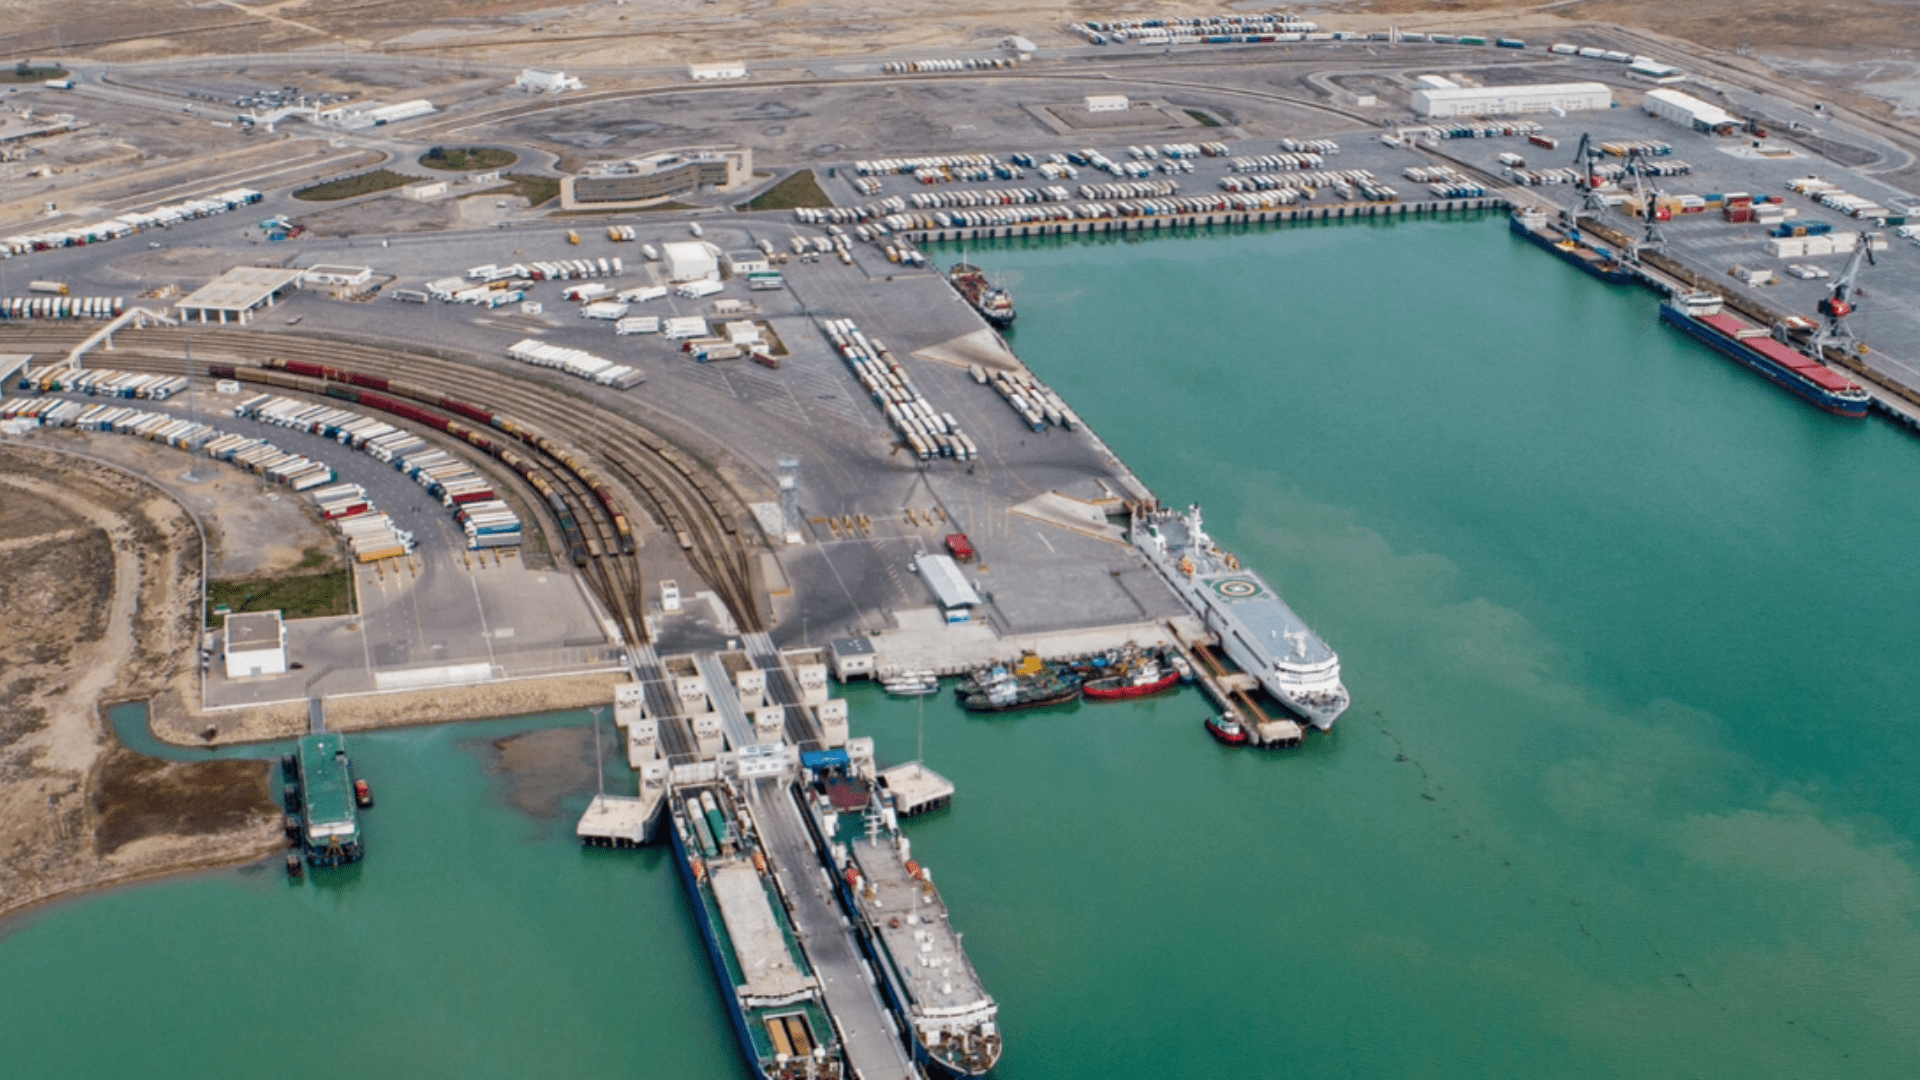  Overview of the initial development of the new port of Baku near Alat